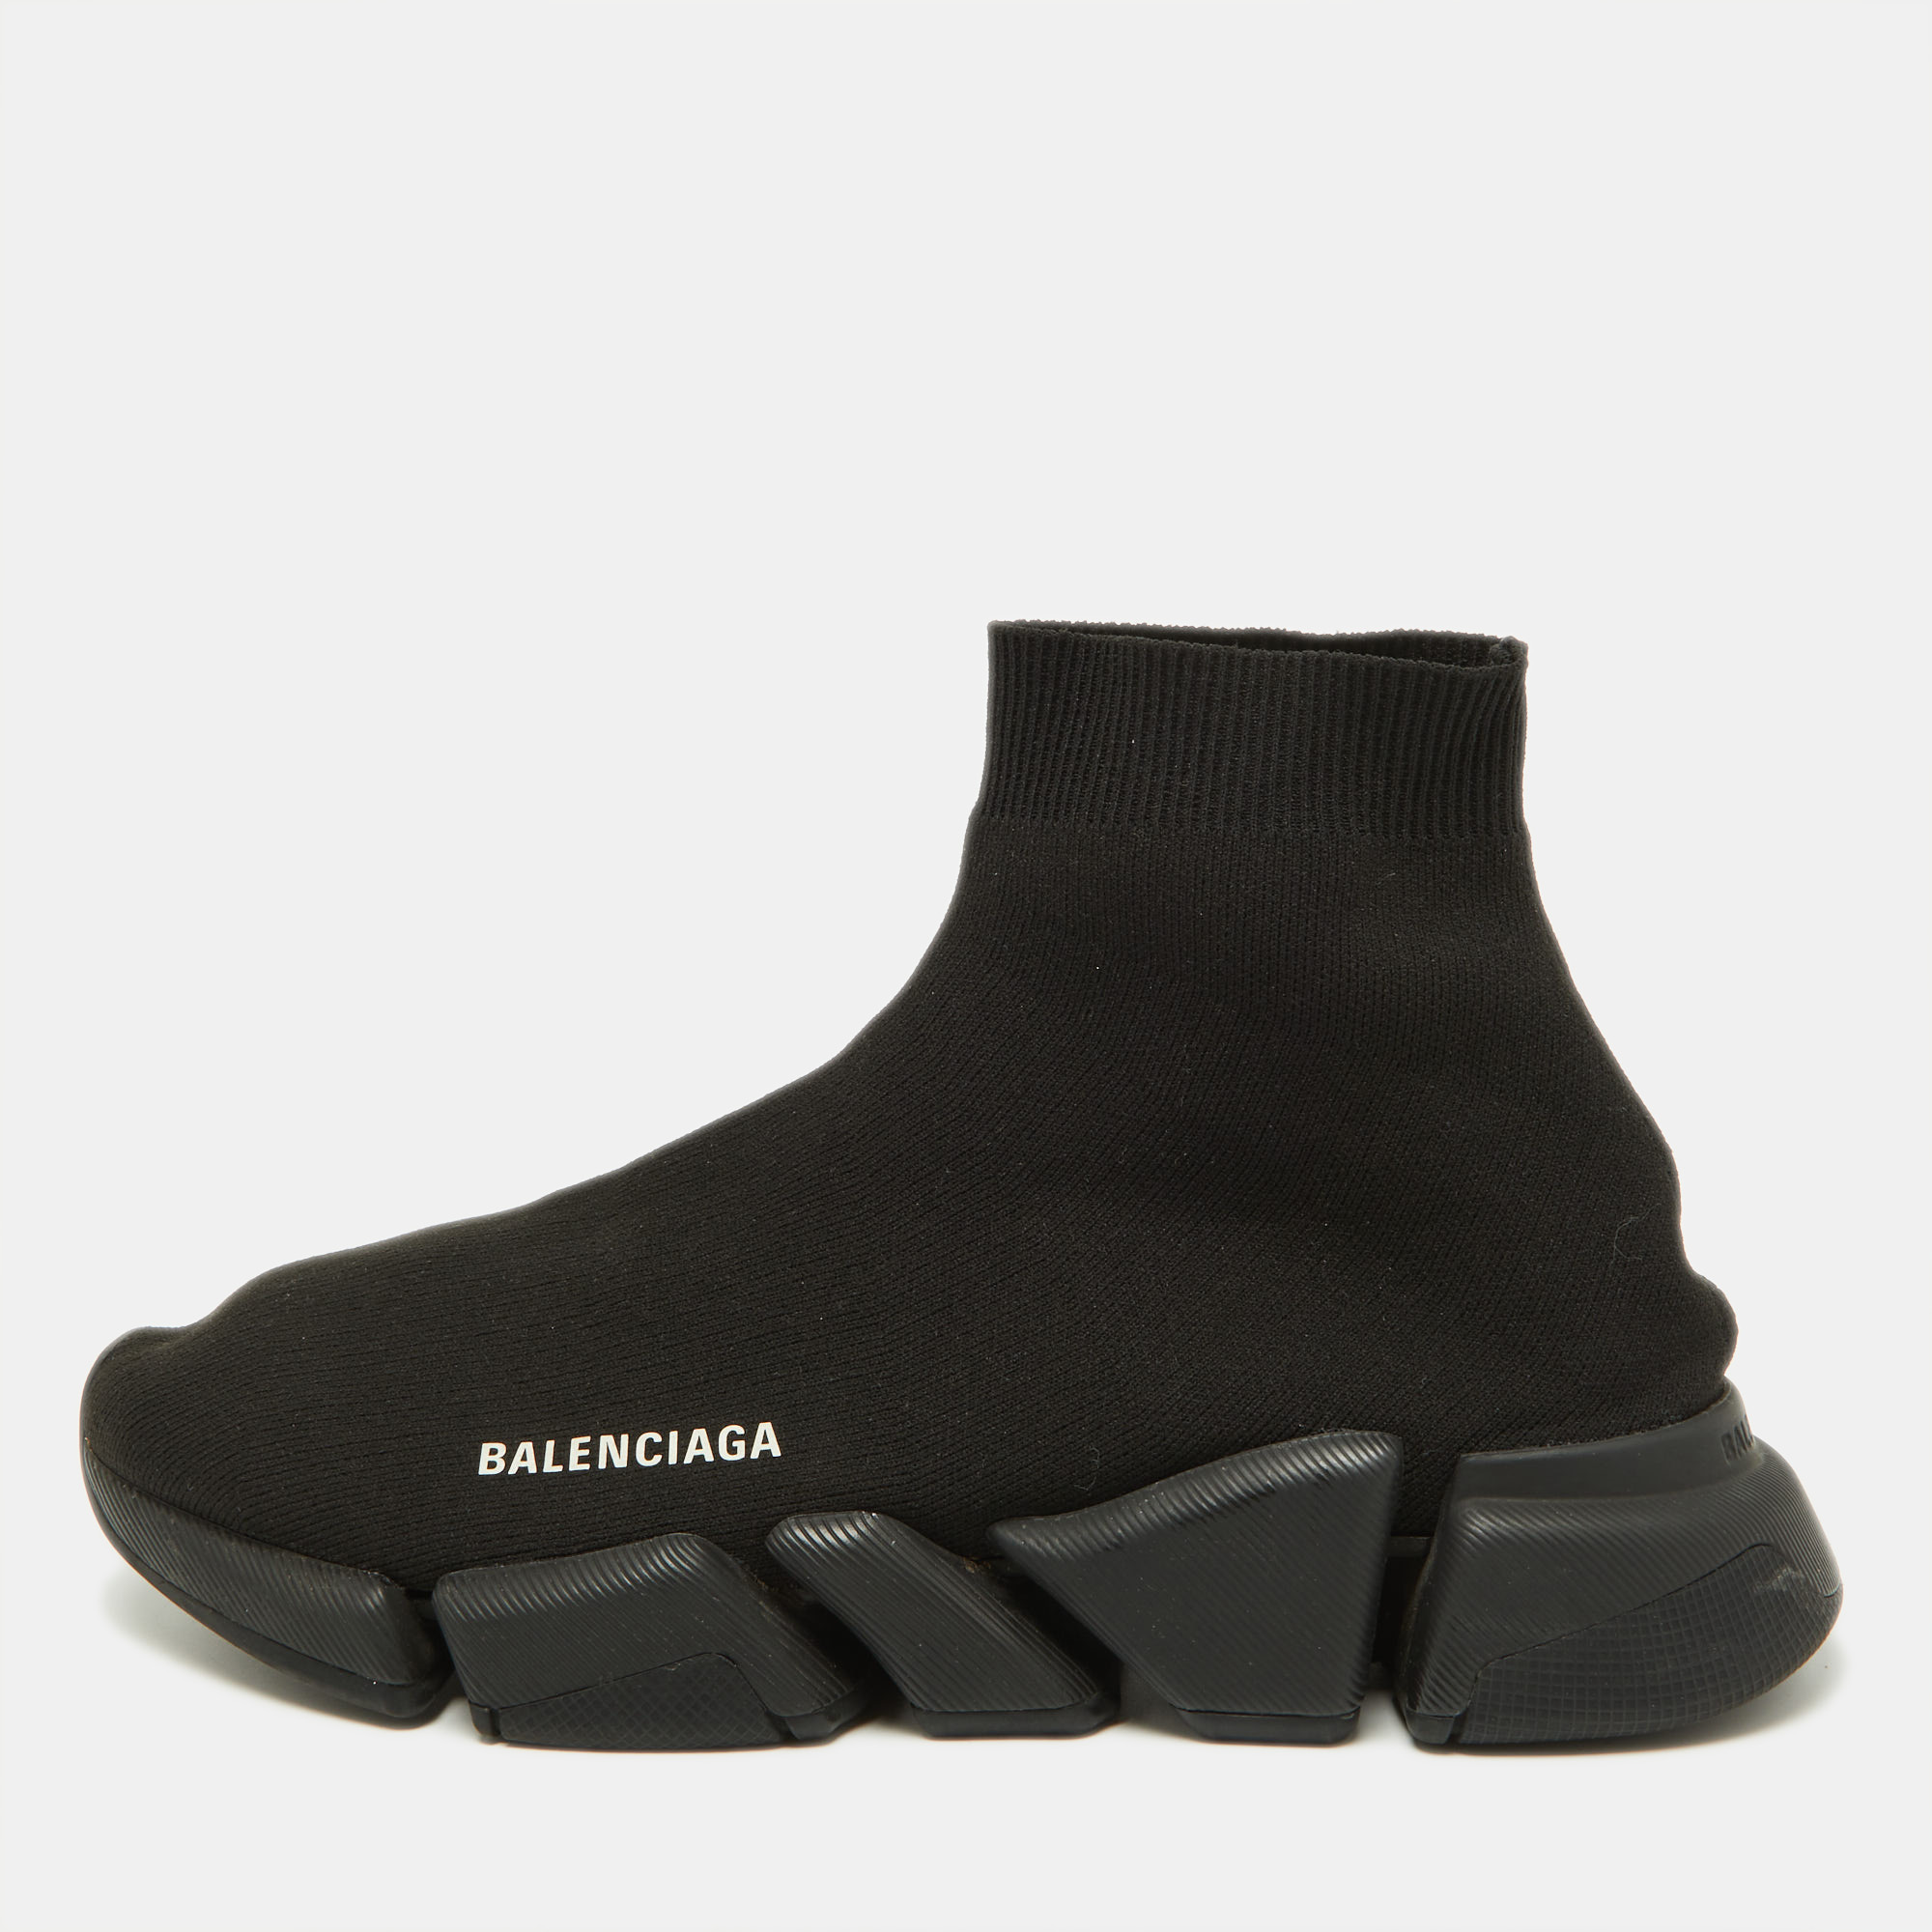 Balenciaga Black Knit Fabric Speed Trainer High Top Sneakers Size 41